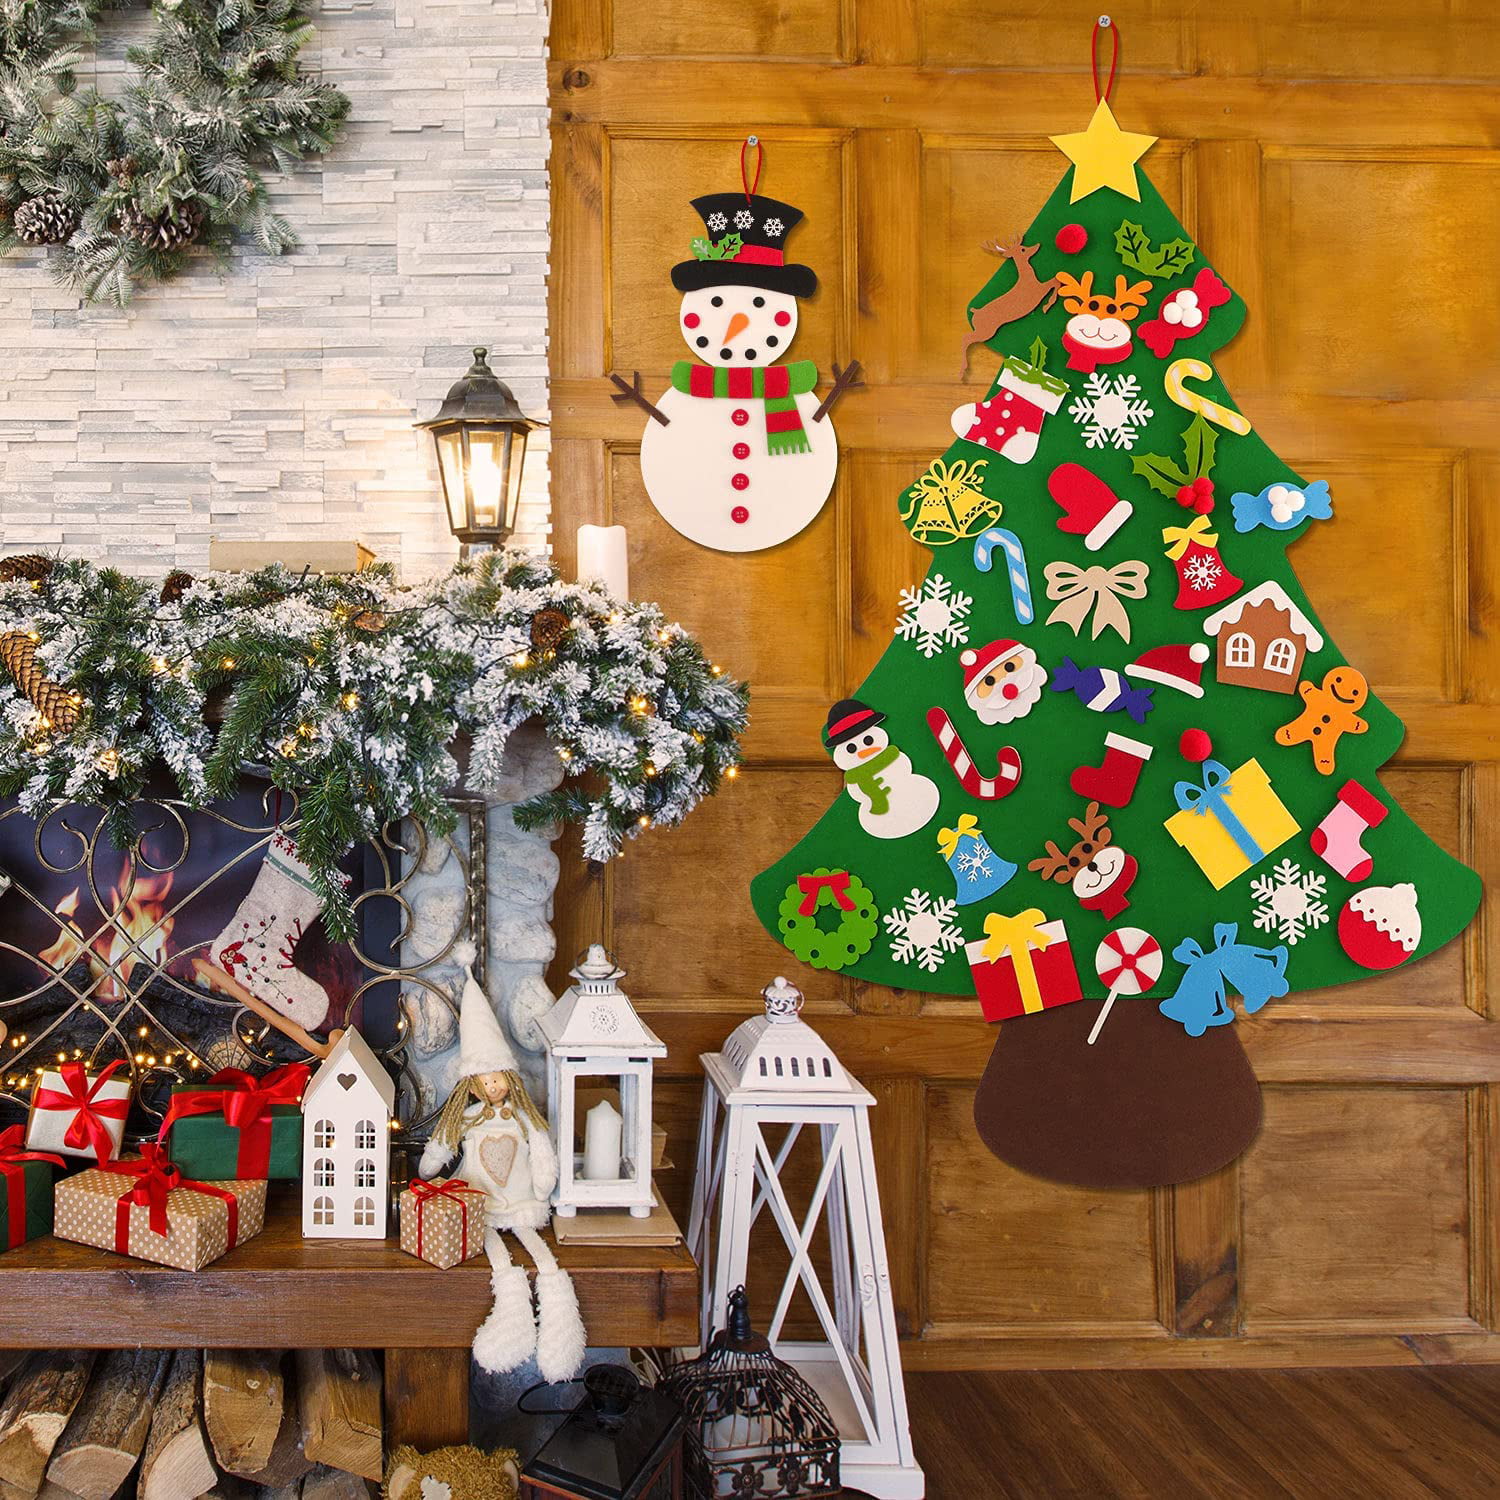 Ywlake 3.3ft DIY Felt Christmas Tree Set Plus Christmas Snowman 40pcs Detachable Ornaments Party Decor Supplies Indoor Wall Hanging Decorations Xmas Gift for Kids Childrens Toddler